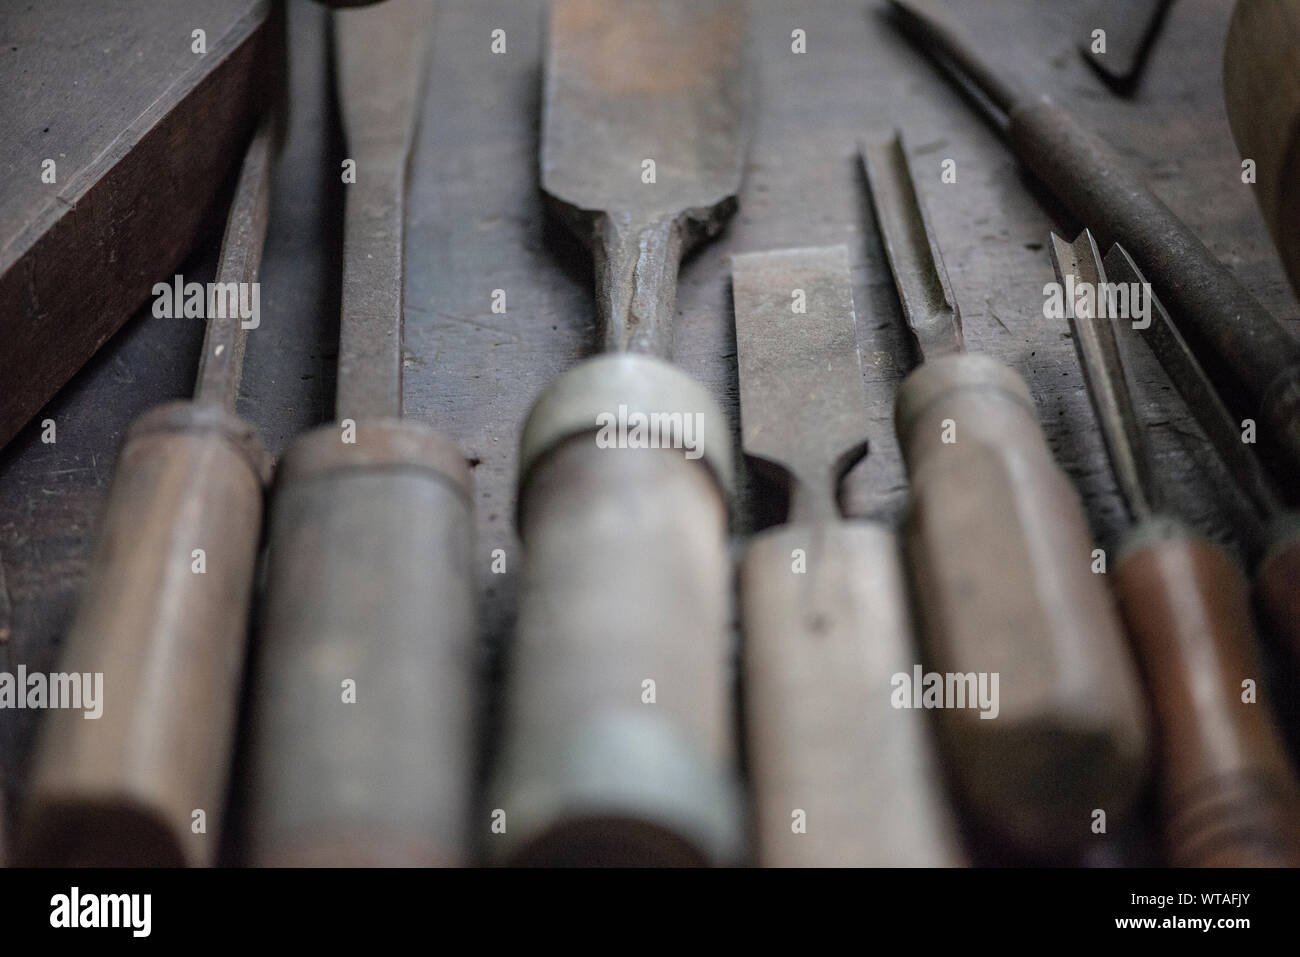 Wood carving tools Stock Photo